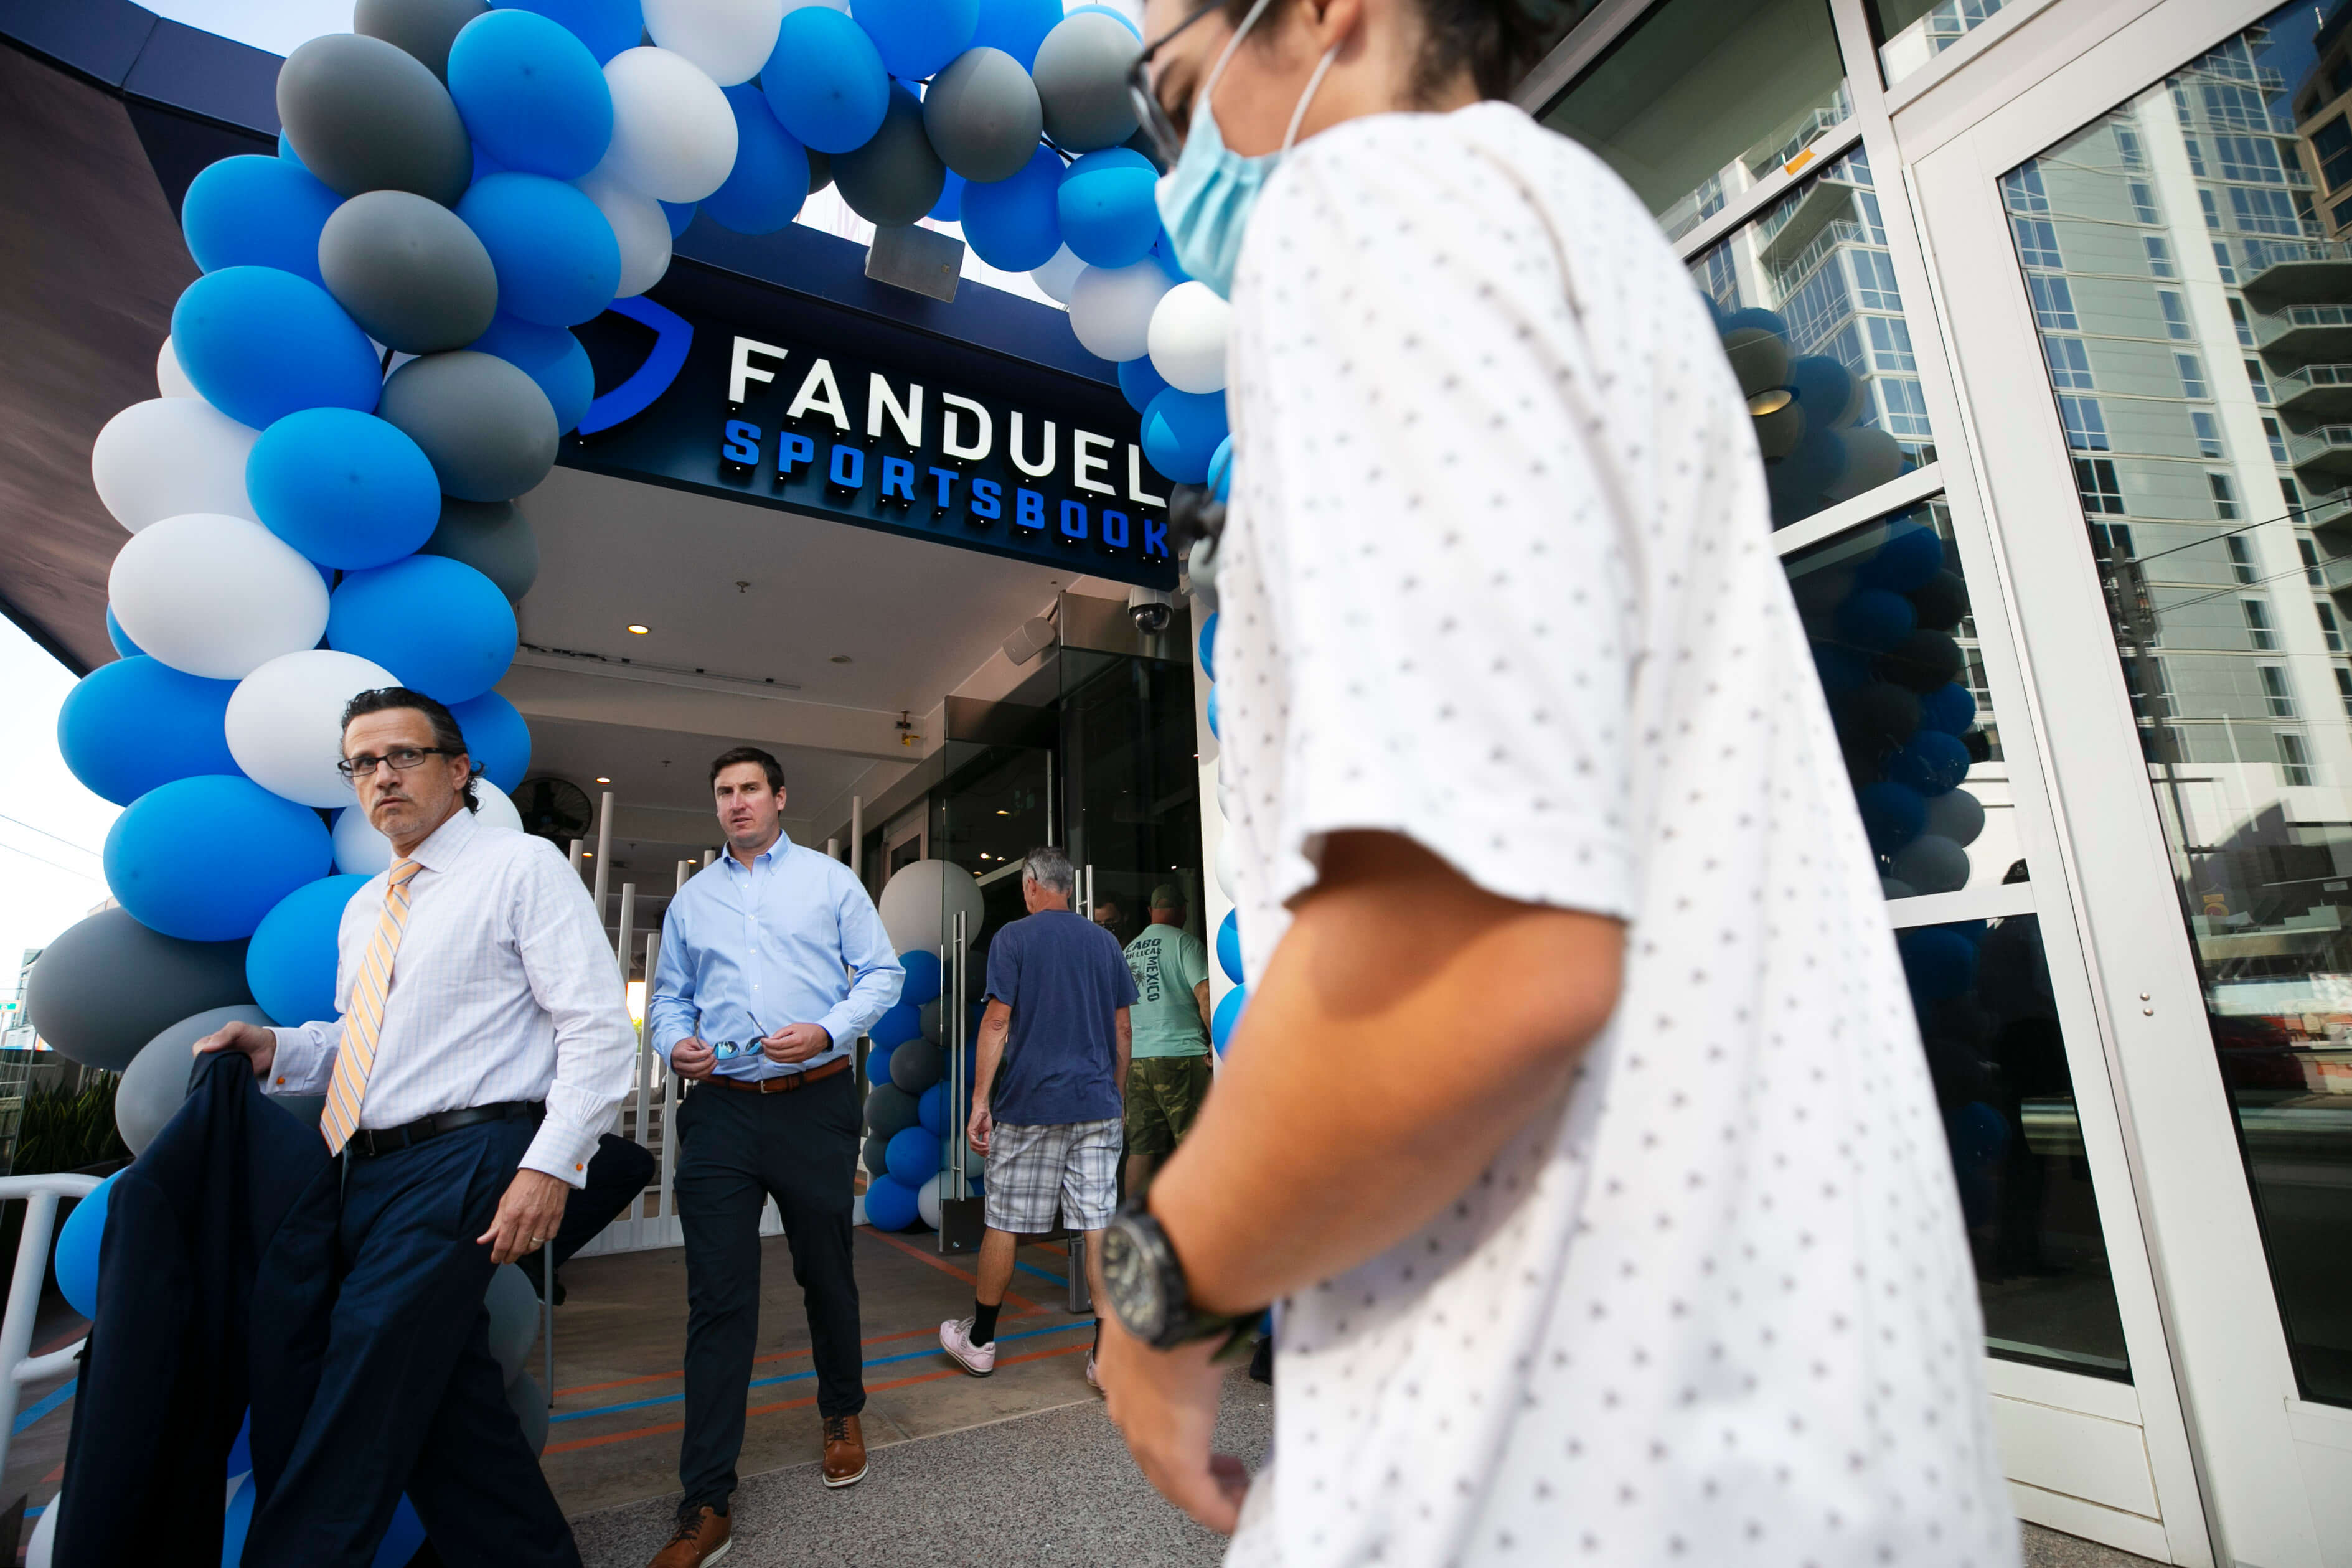 Sep 8, 2021; Phoenix, AZ, USA; People exit the FanDuel Sportsbook at the Footprint Center in Phoenix on their opening day on September 8, 2021. David Wallace/The Republic via USA TODAY NETWORK